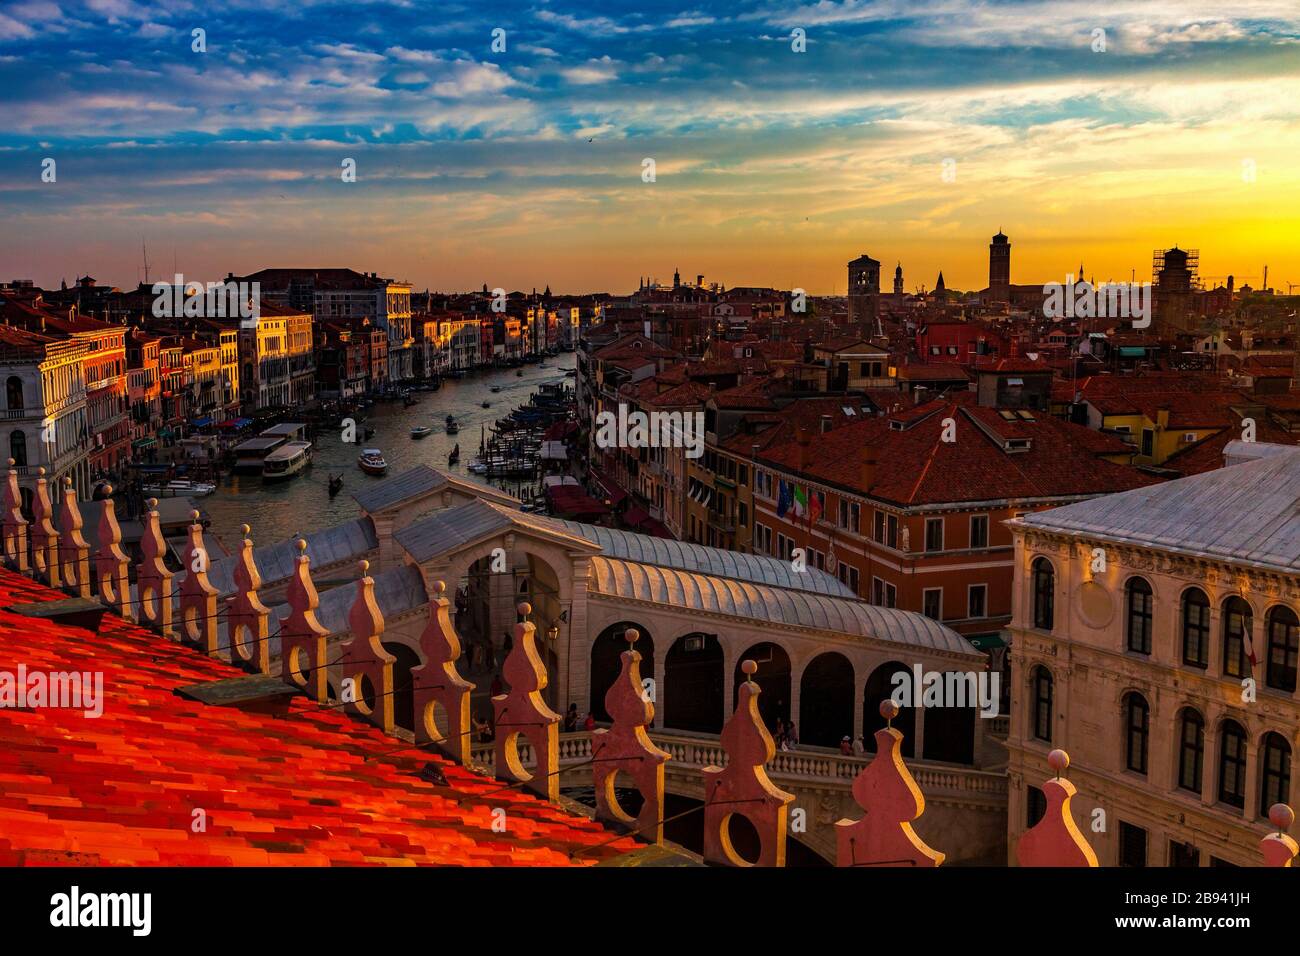 Aerial view of Venice, Italy at sunset Stock Photo